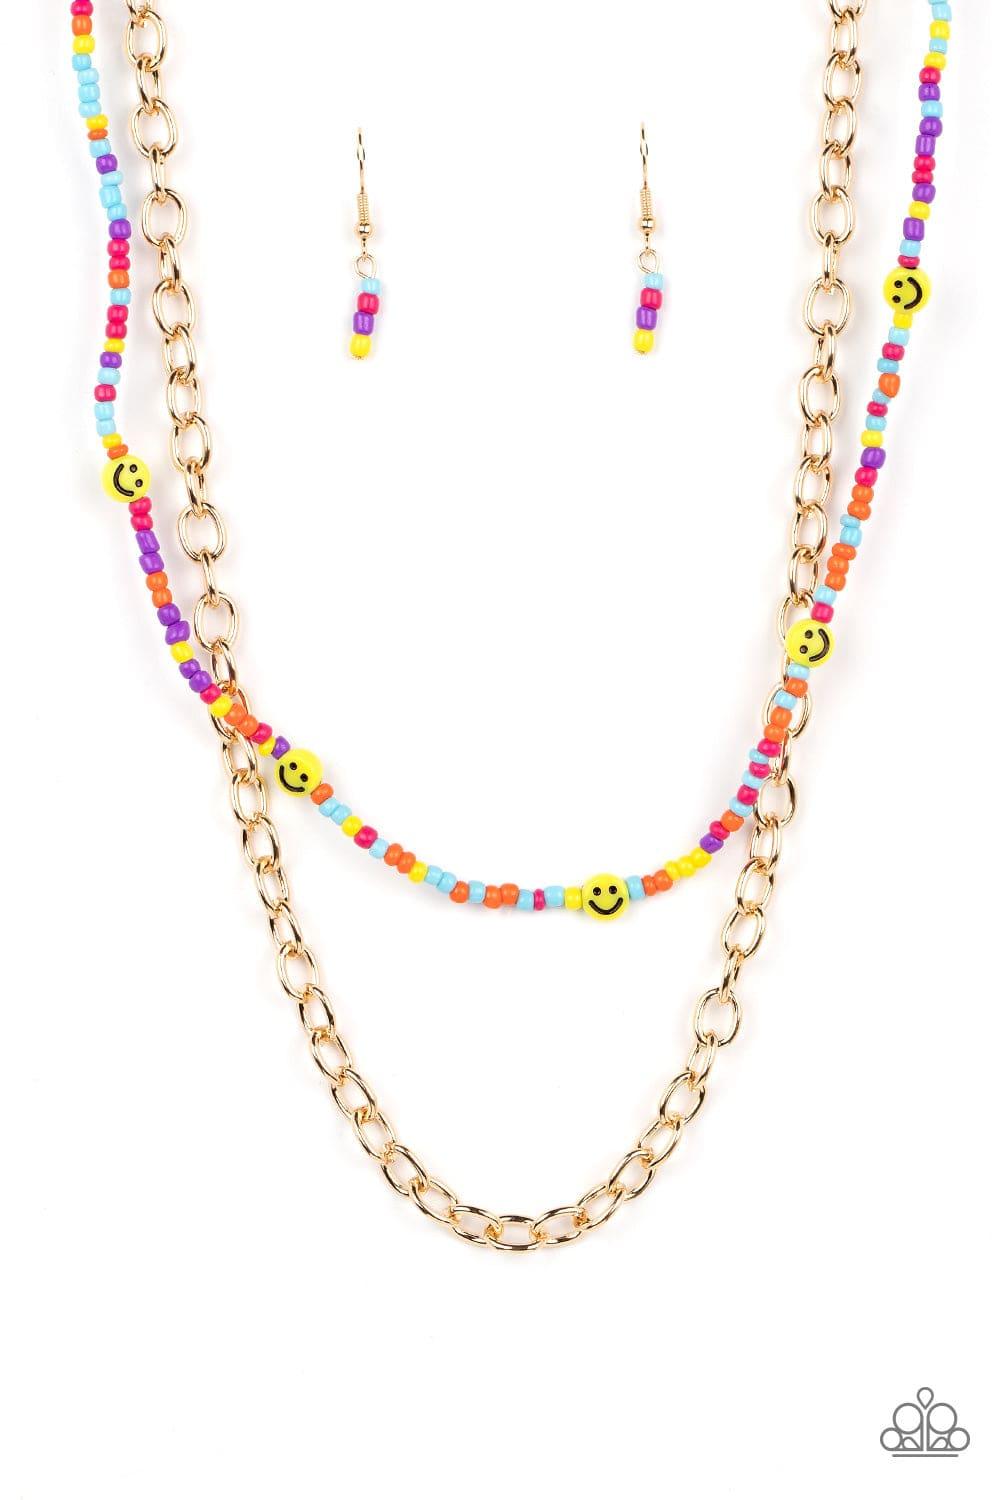 Paparazzi Accessories - Happy Looks Good On You - Multicolor Necklace - Bling by JessieK